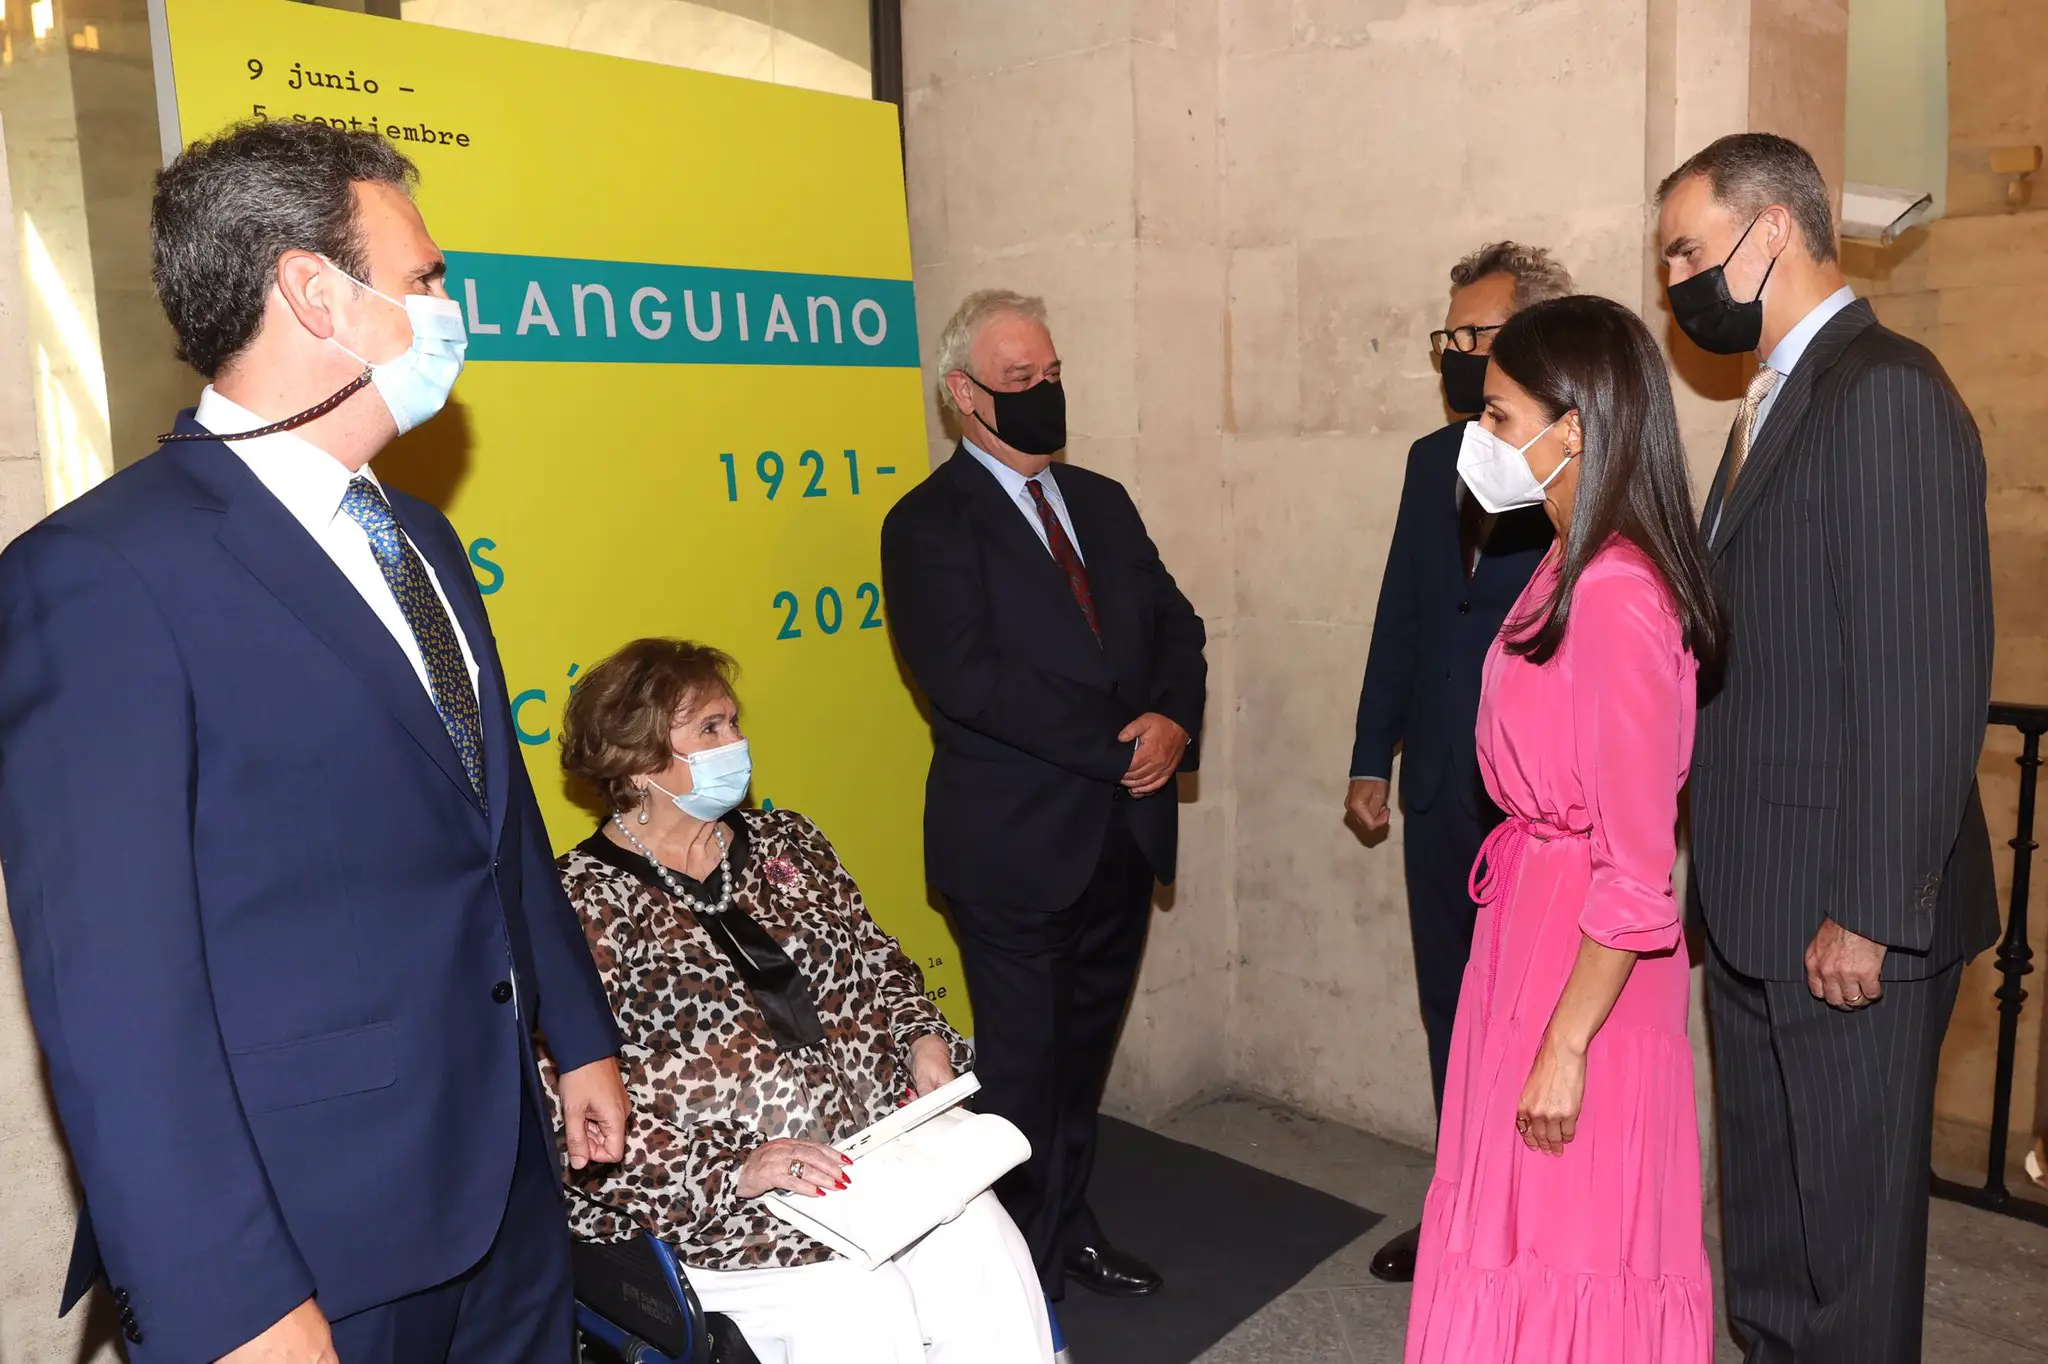 King Felipe and Queen Letizia toured the exhibition and also met with the family members of Luis García Berlanga